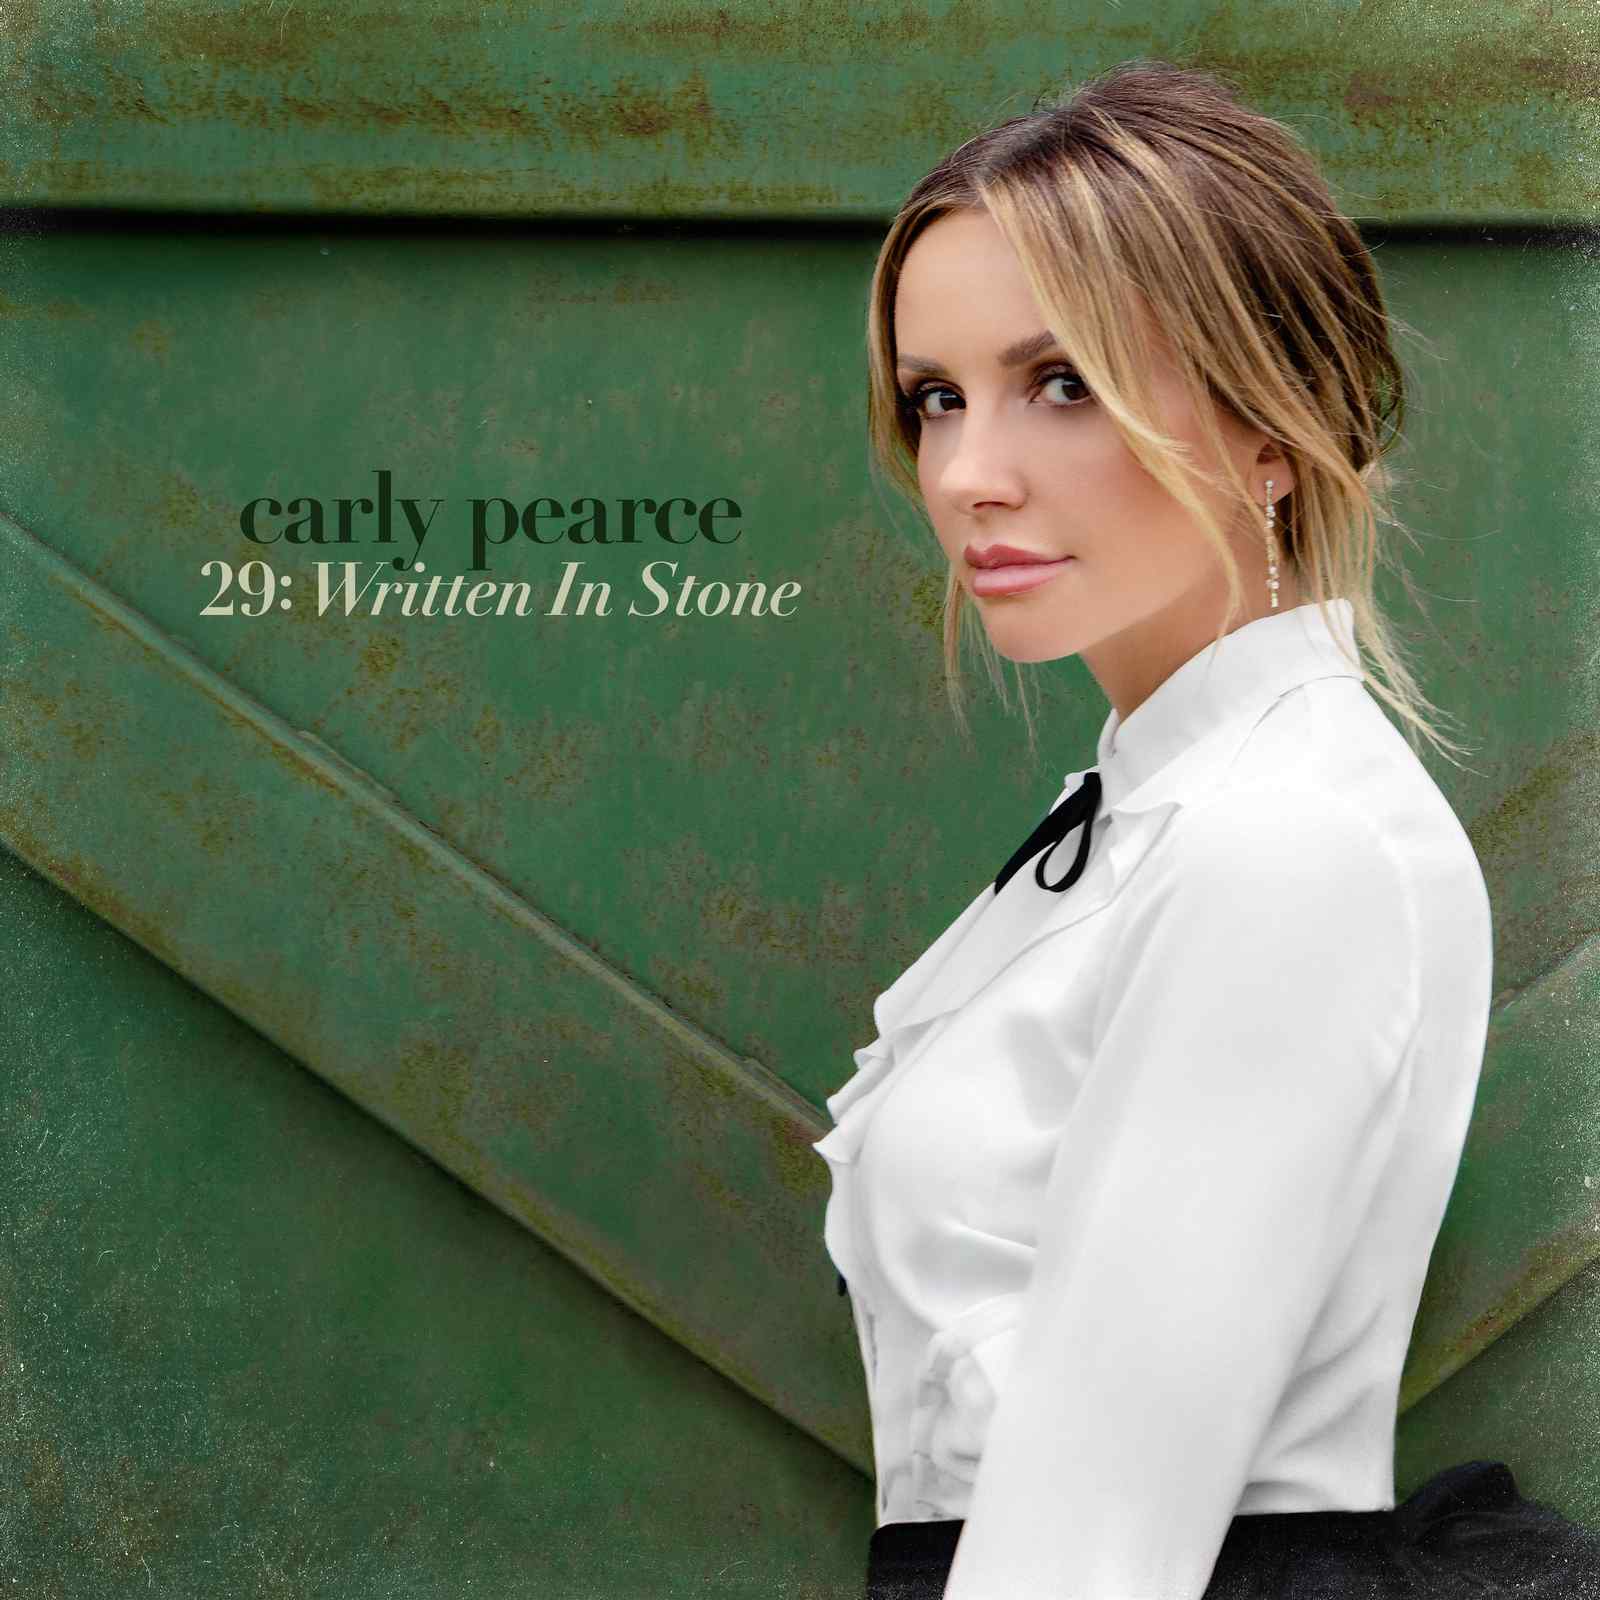 29: Written In Stone by Carly Pearce